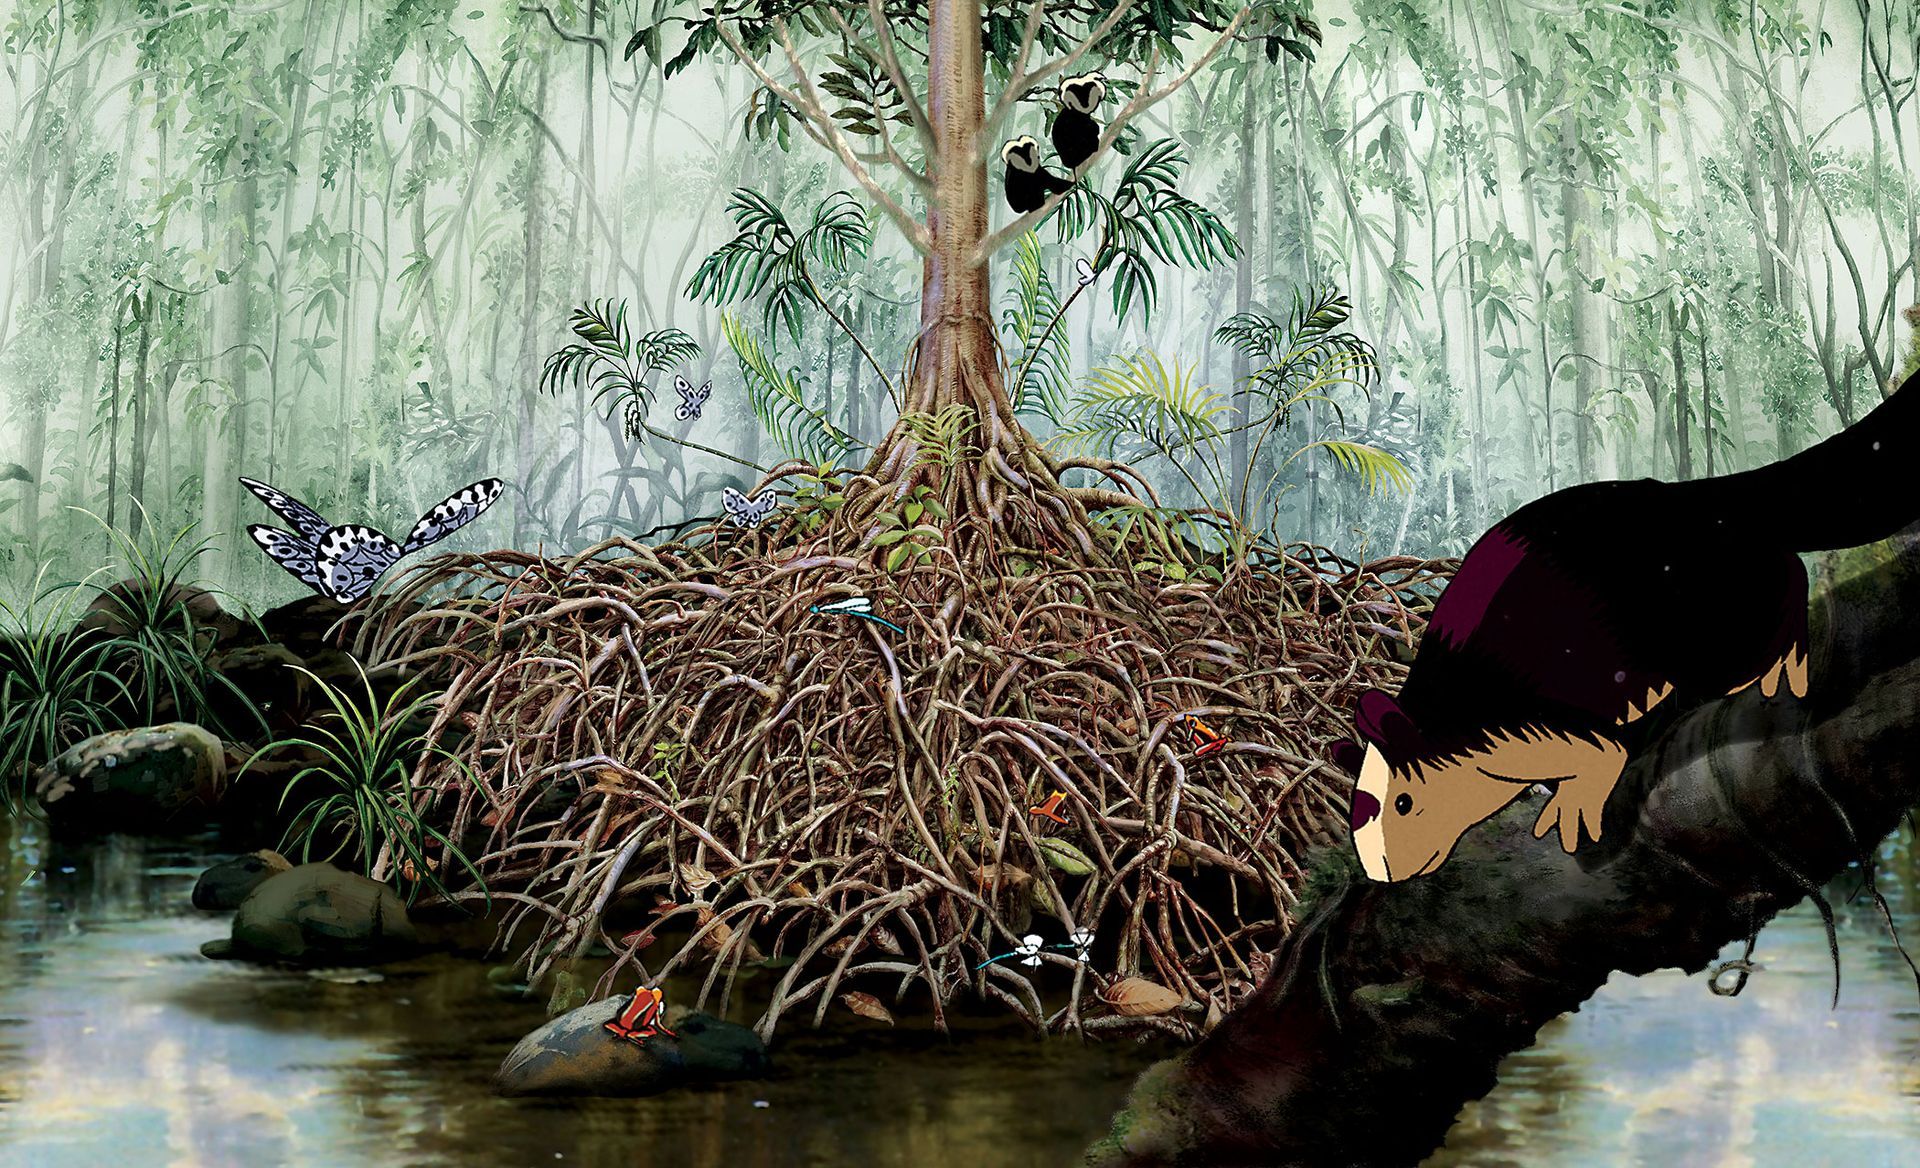 A still from Spirit of the Forest showing a Muistica Fatua tree along with endemic fauna like the Malabar giant squirrel, lion-tailed macaque, Myistica swamp tree frog, Myistica sapphire damselfly and Malabar tree nymph butterfly.